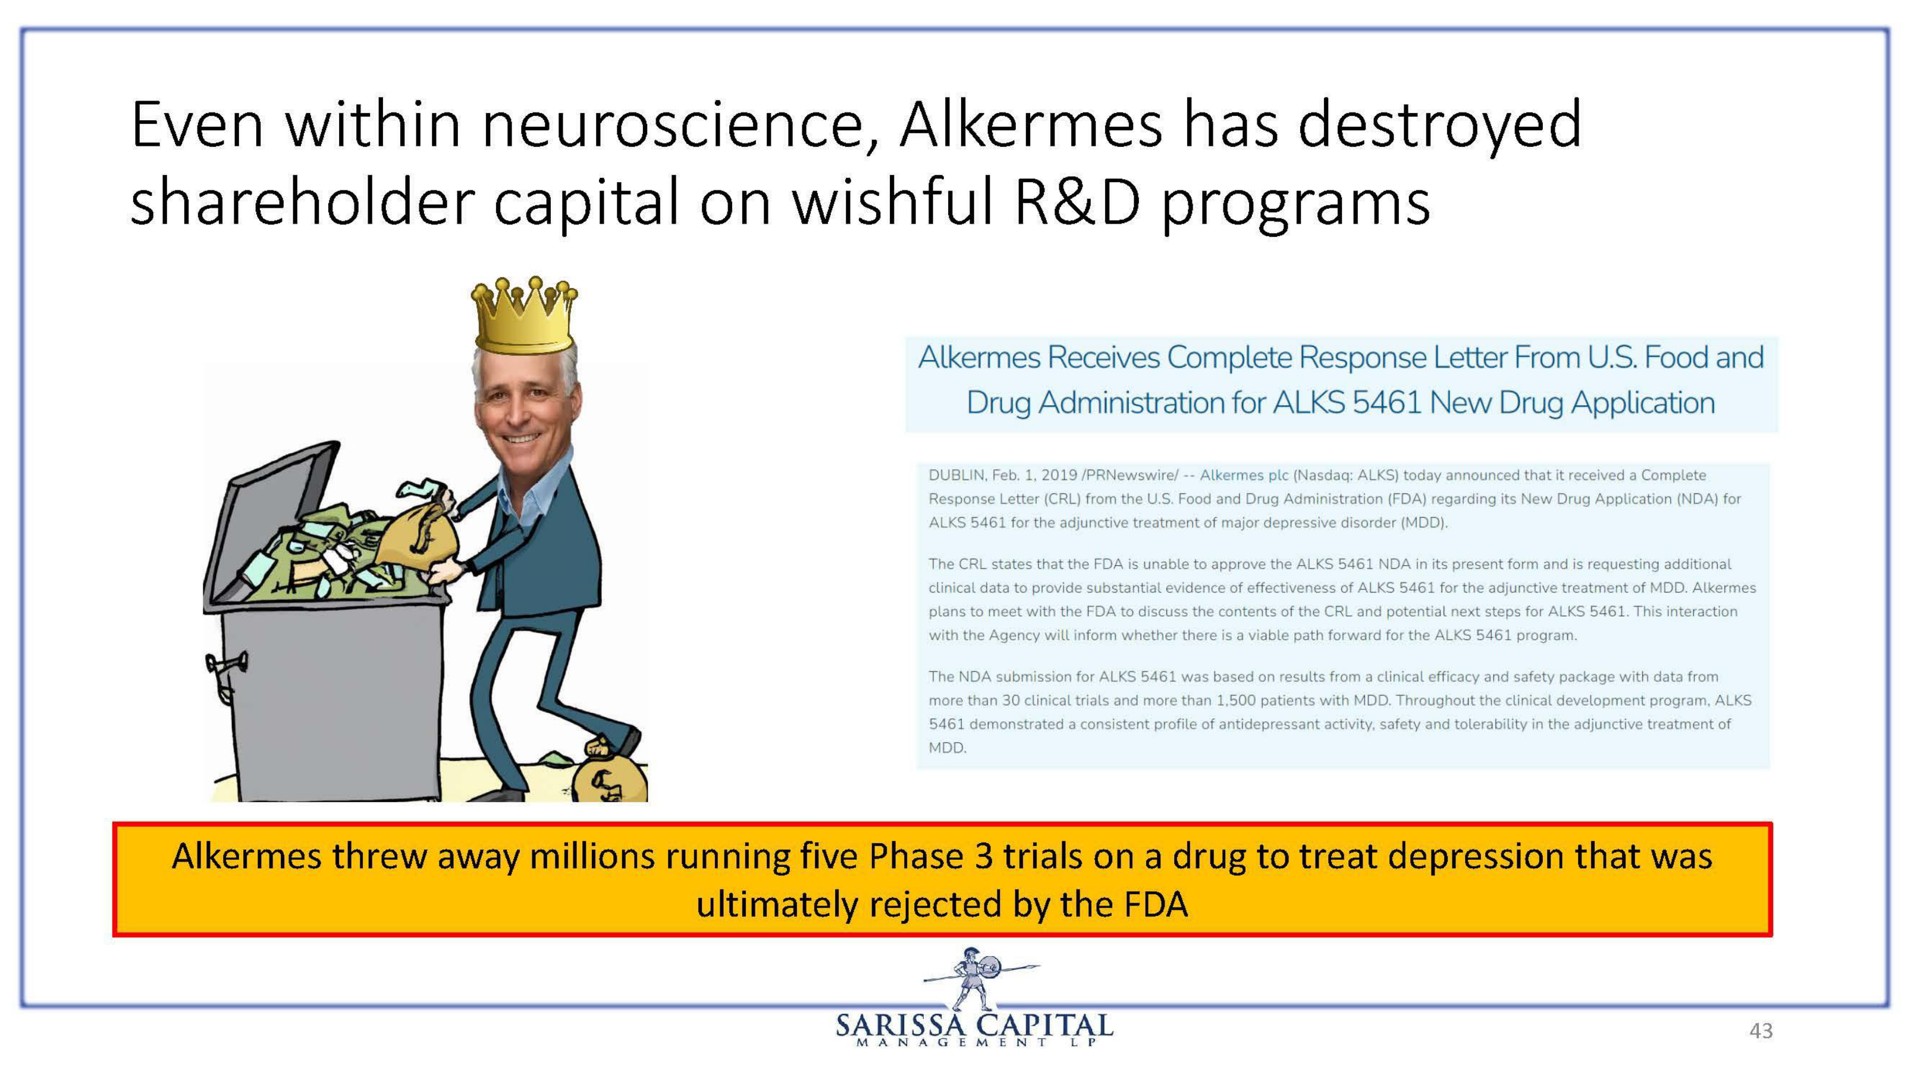 even within alkermes has destroyed shareholder capital on wishful programs | Sarissa Capital